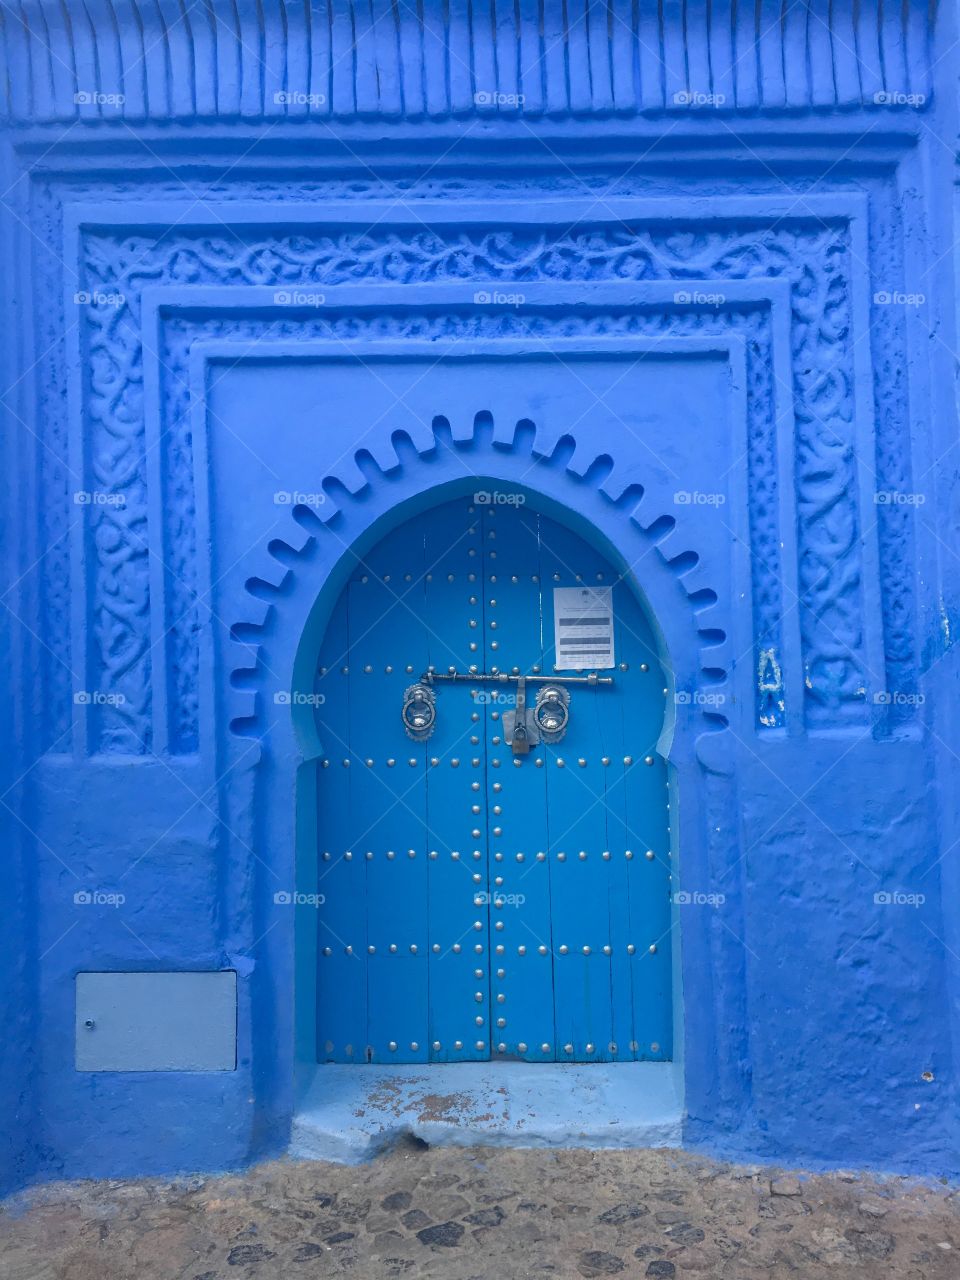 The blue city in Morocco ❤️